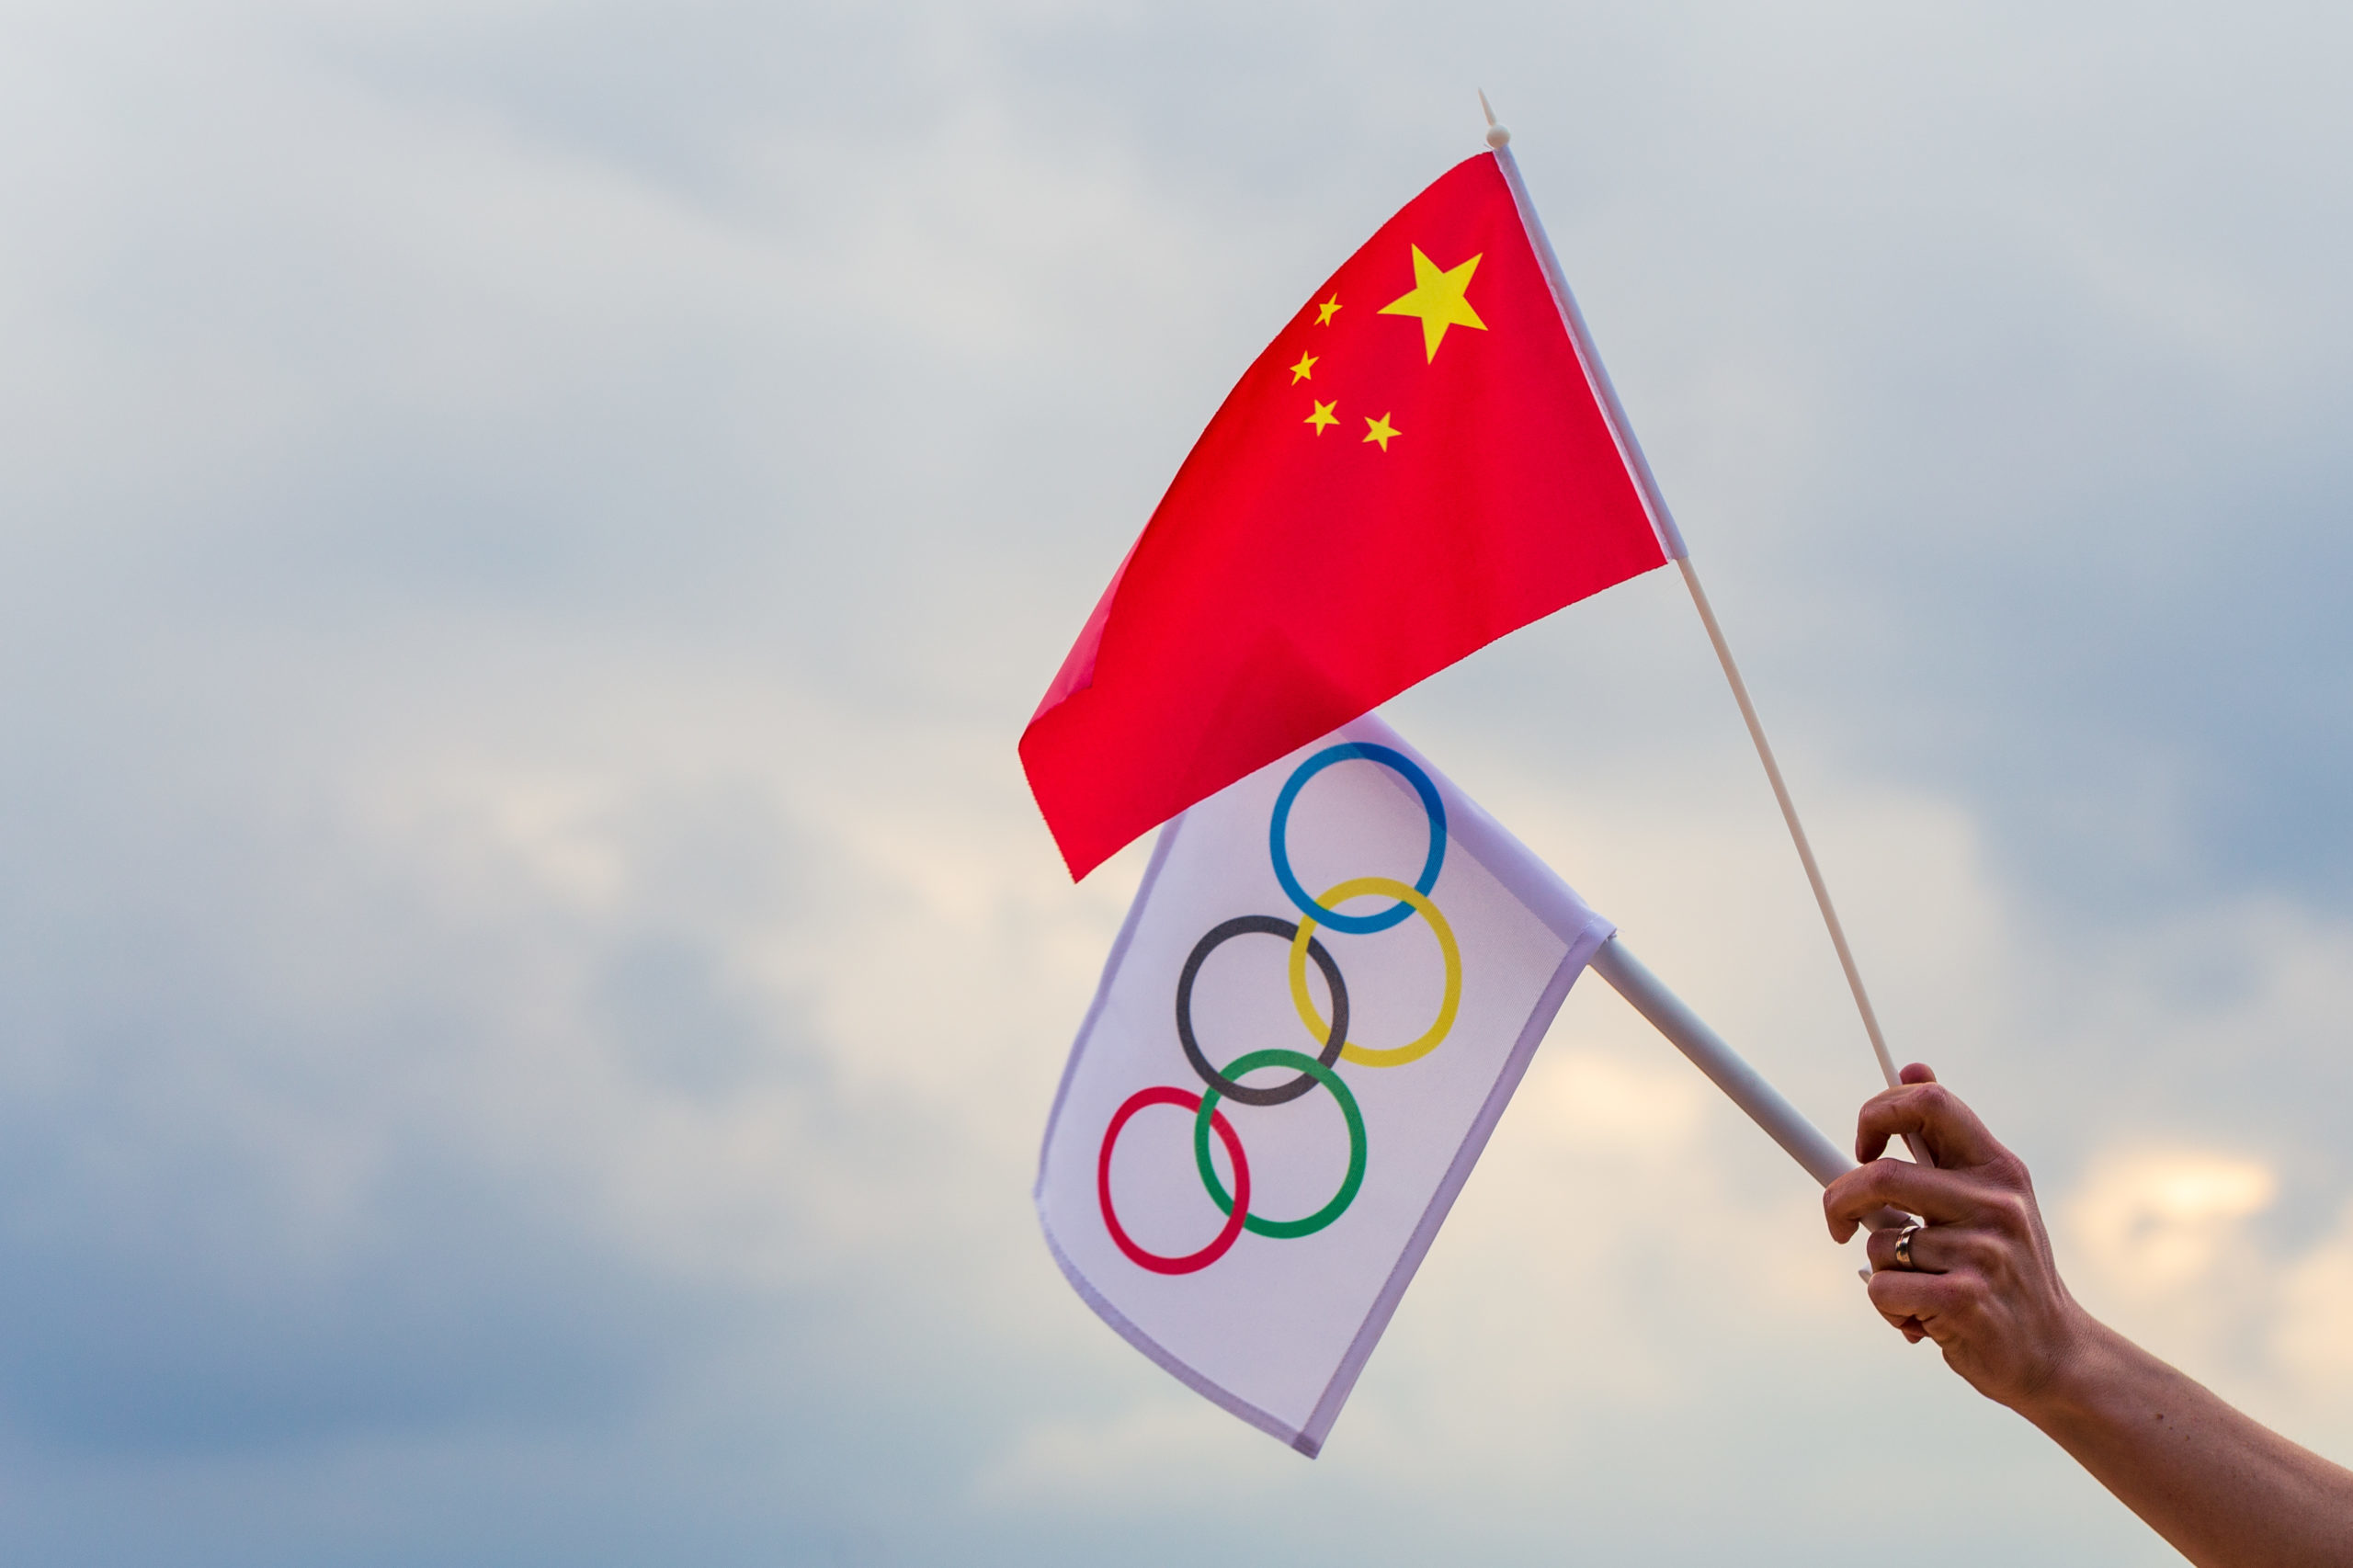 Beijing’s Olympic Moments, 2008 and 2022: How China and the Meaning of the Games Have, and Have Not, Changed